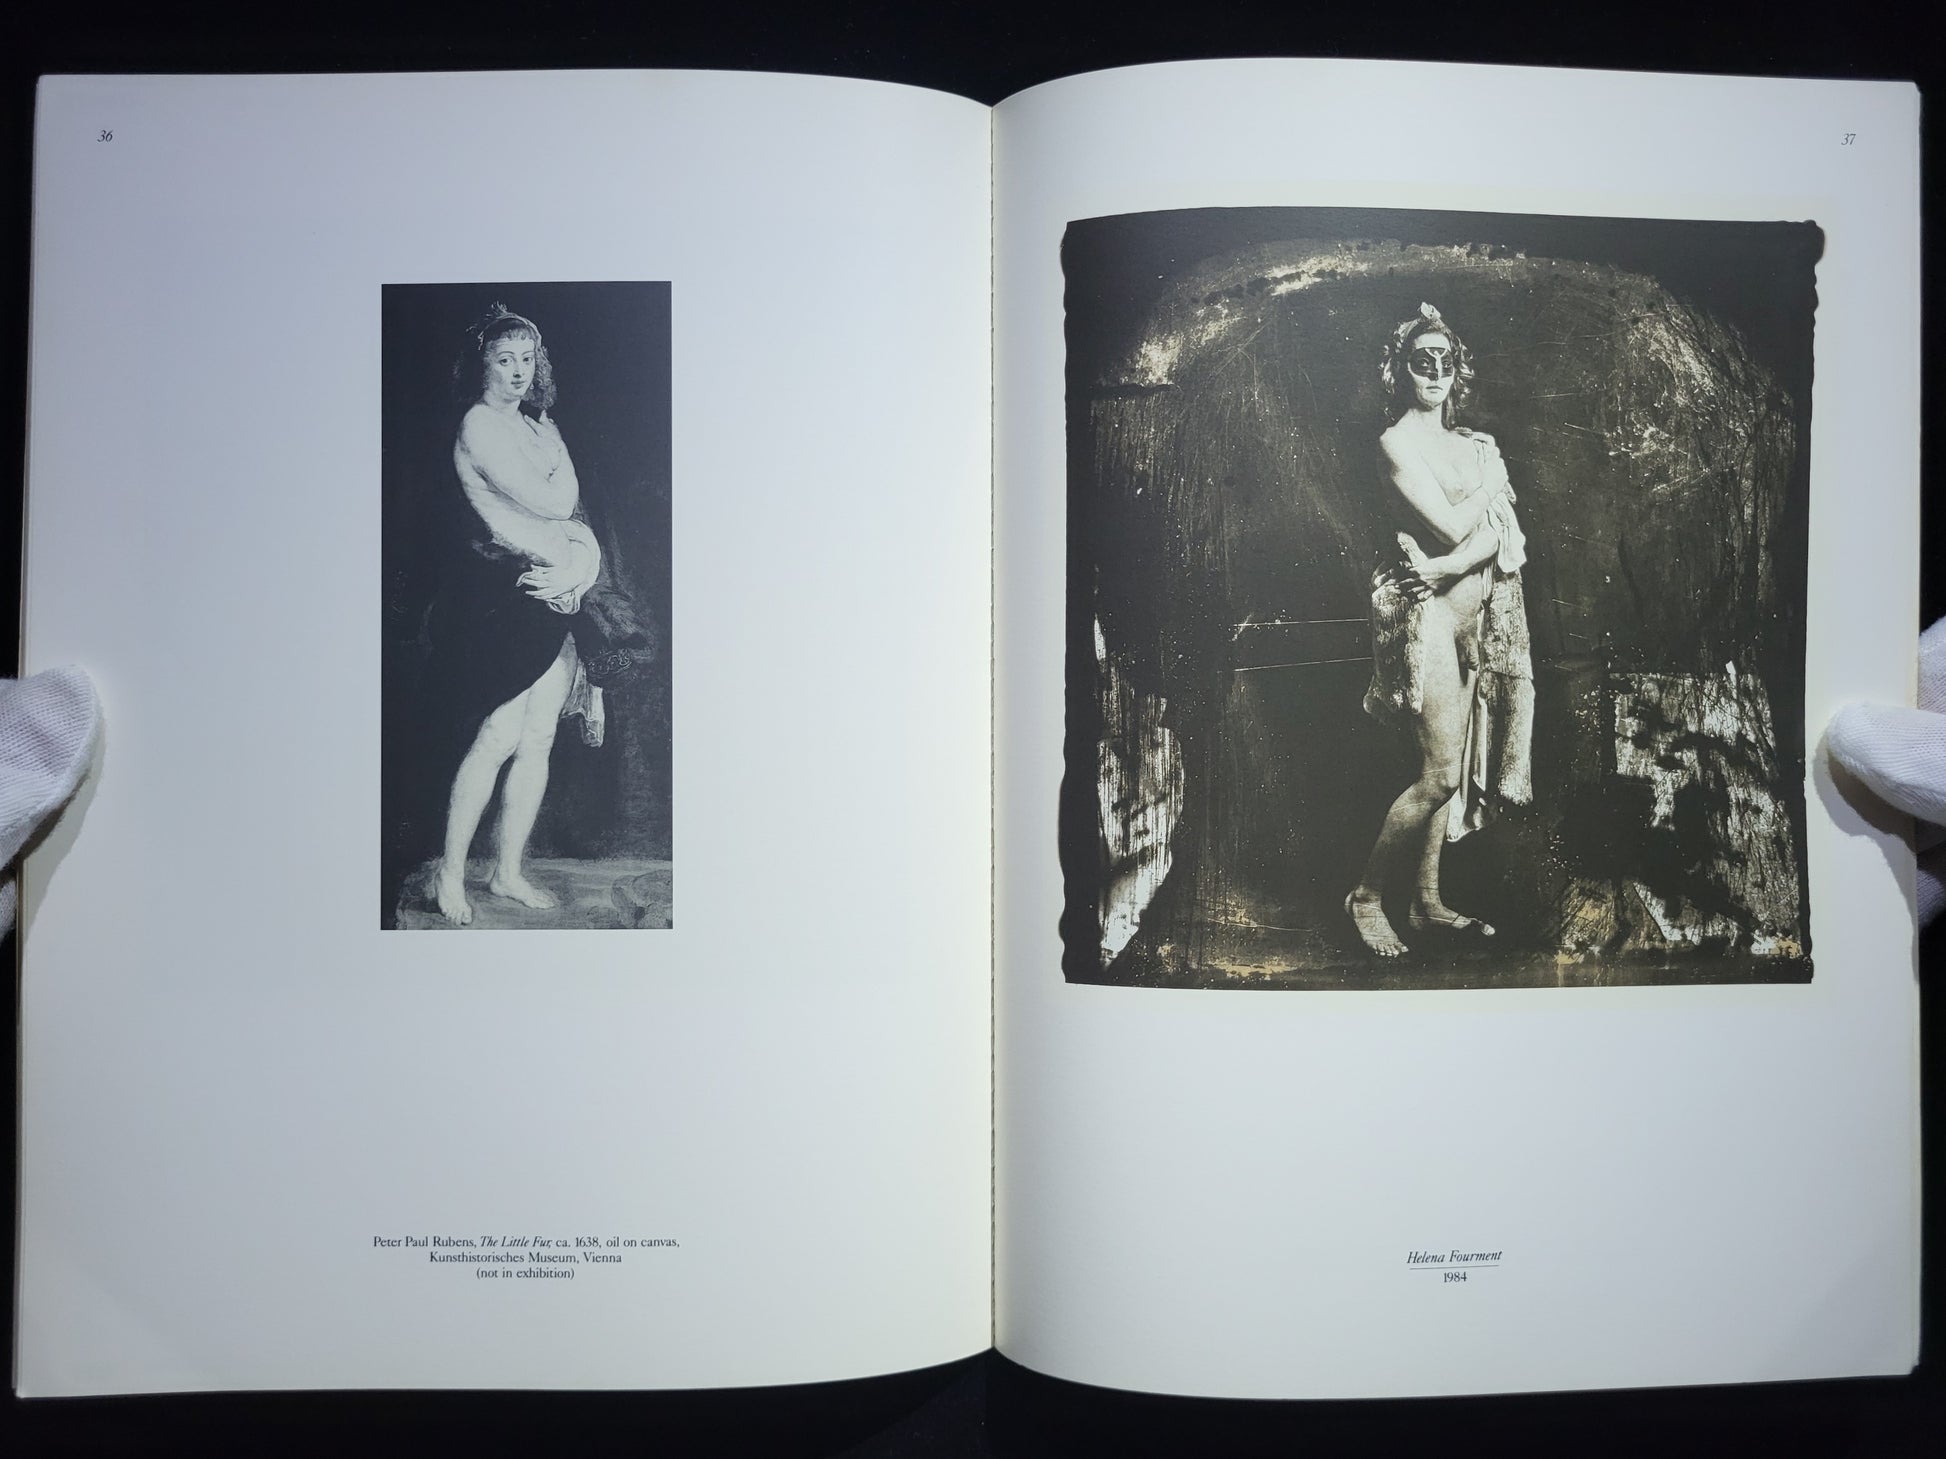 Joel-Peter Witkin FORTY PHOTOGRAPHS